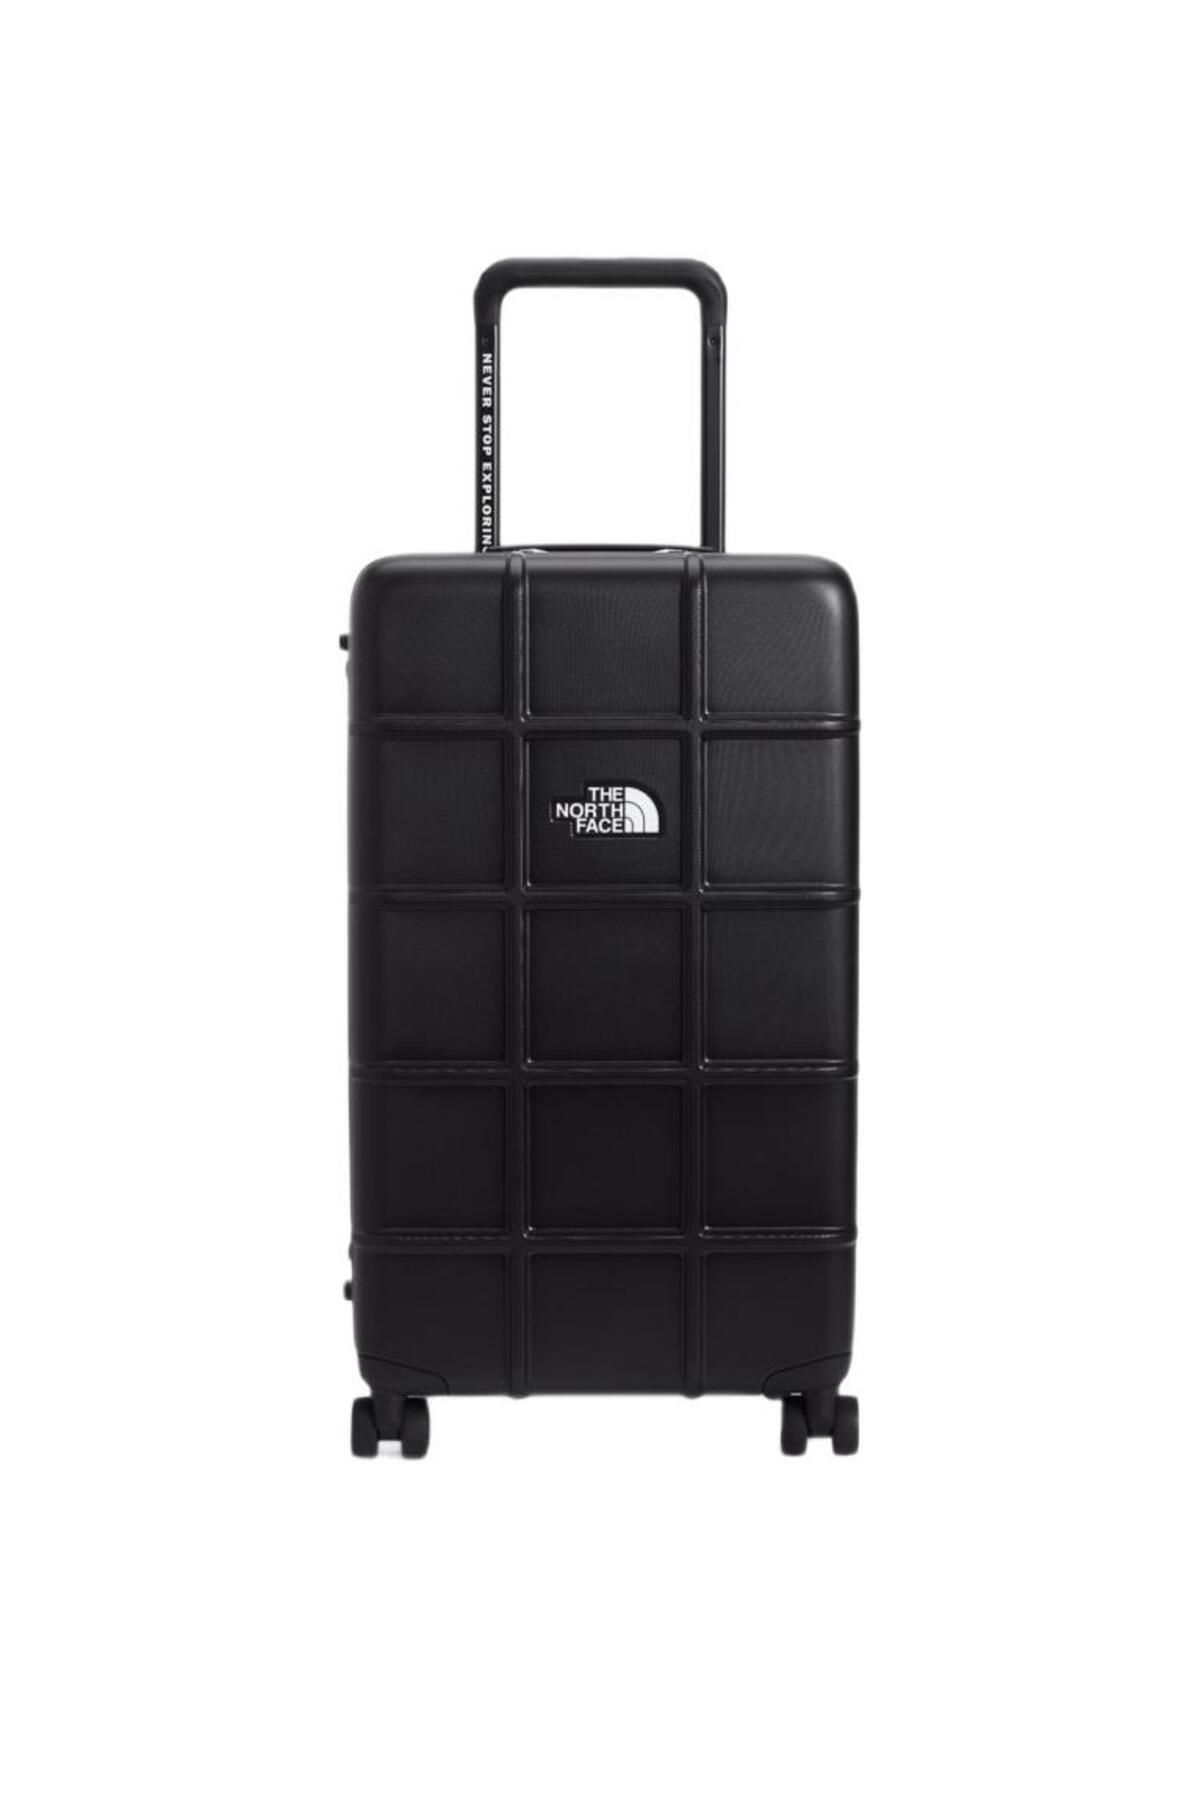 The North Face All Weather 4-Wheeler Luggage 30''